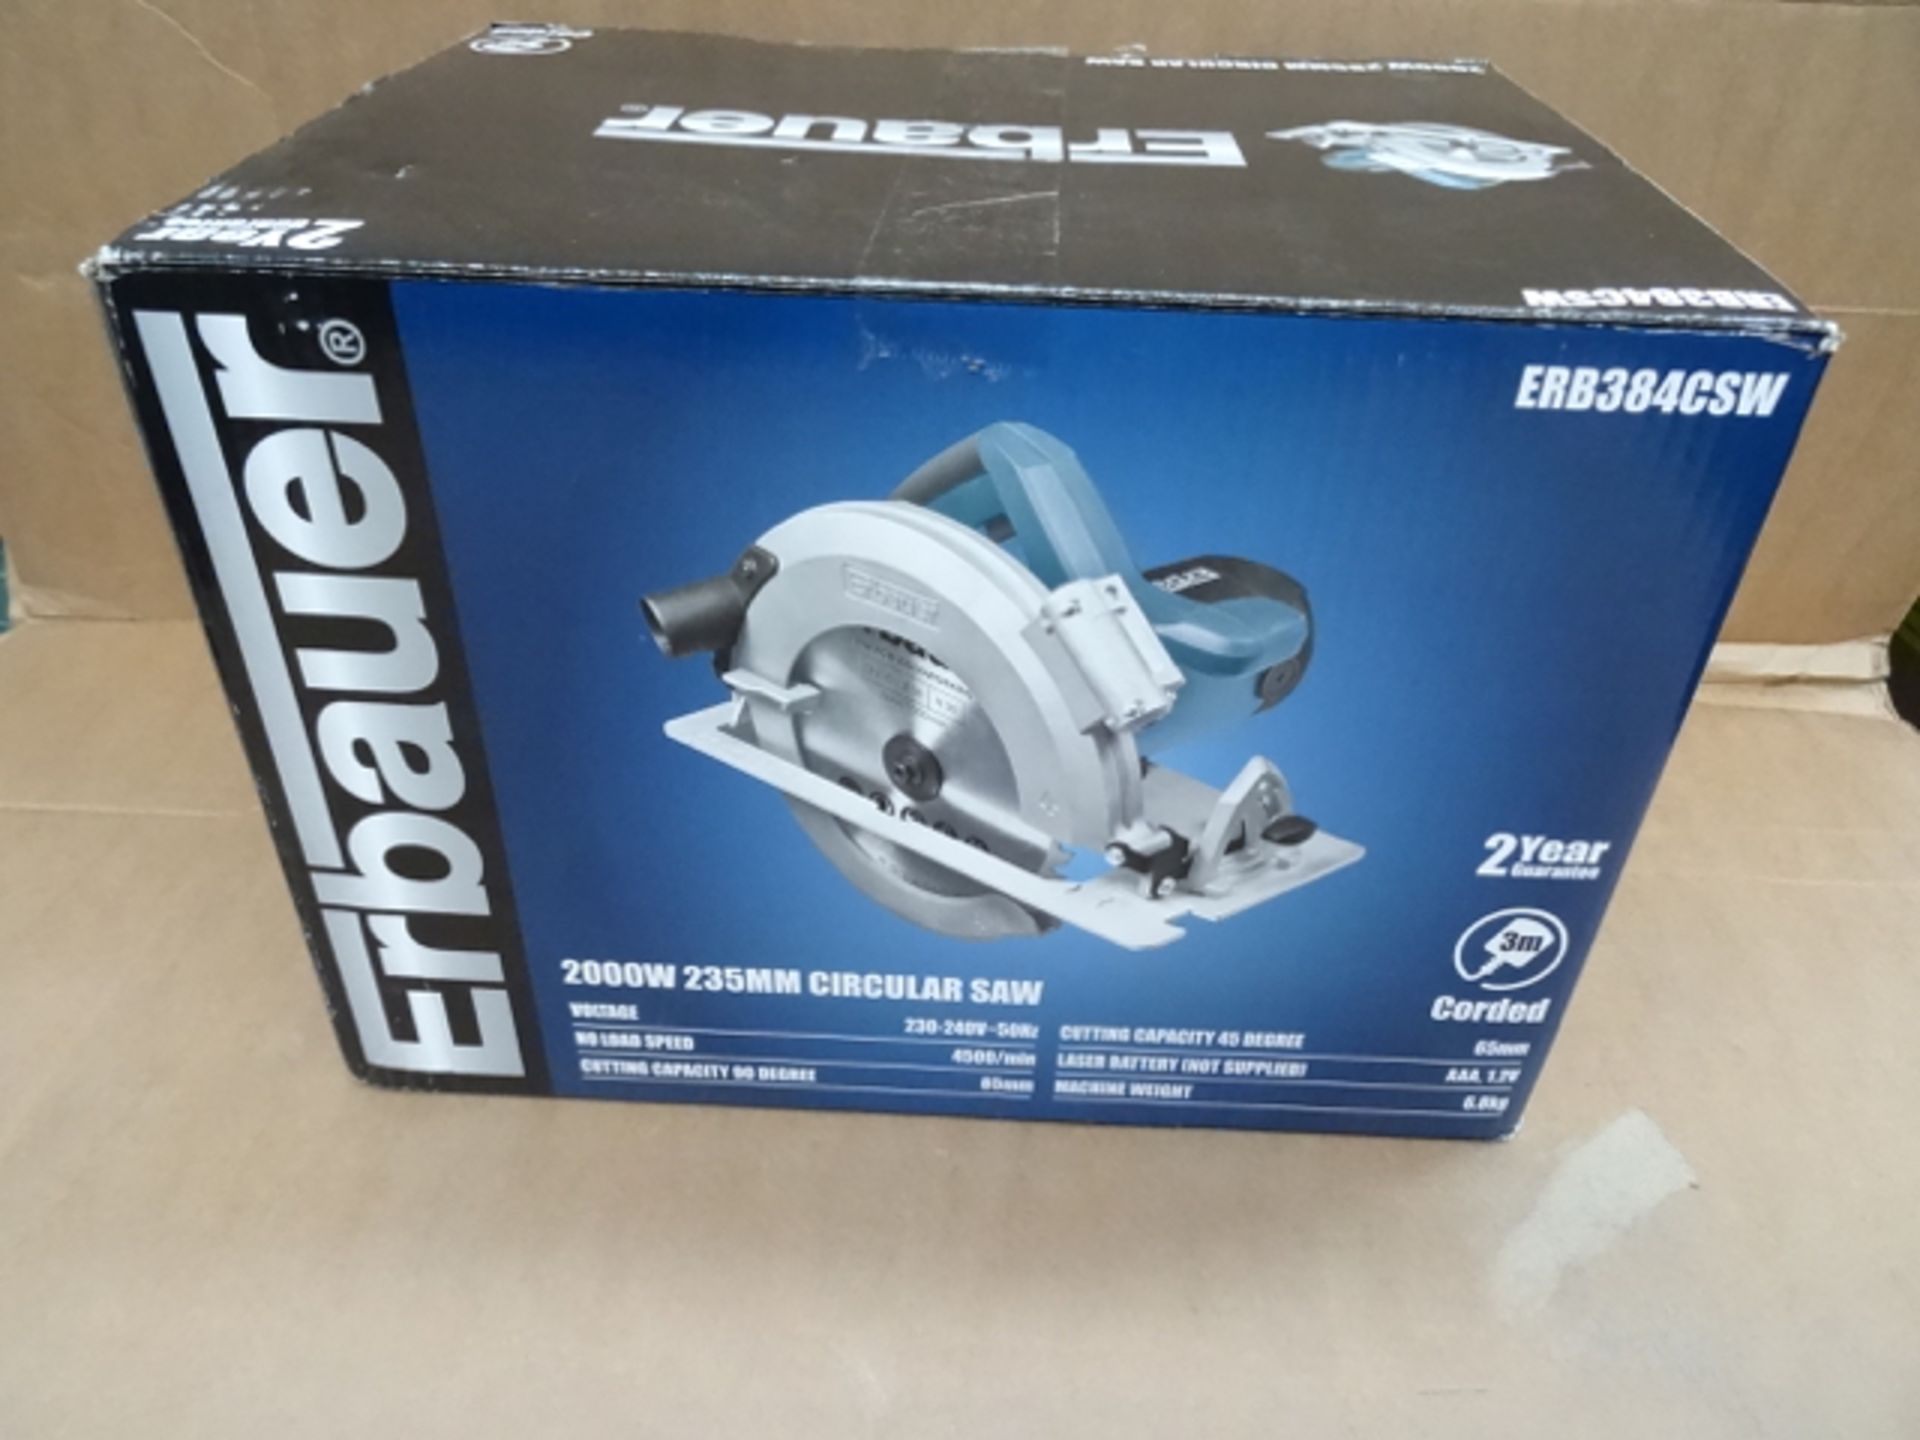 1 x Erbauer ERB384CSW 2000W 235MM Circular Saw. Professional saw with laser and parallel guide,